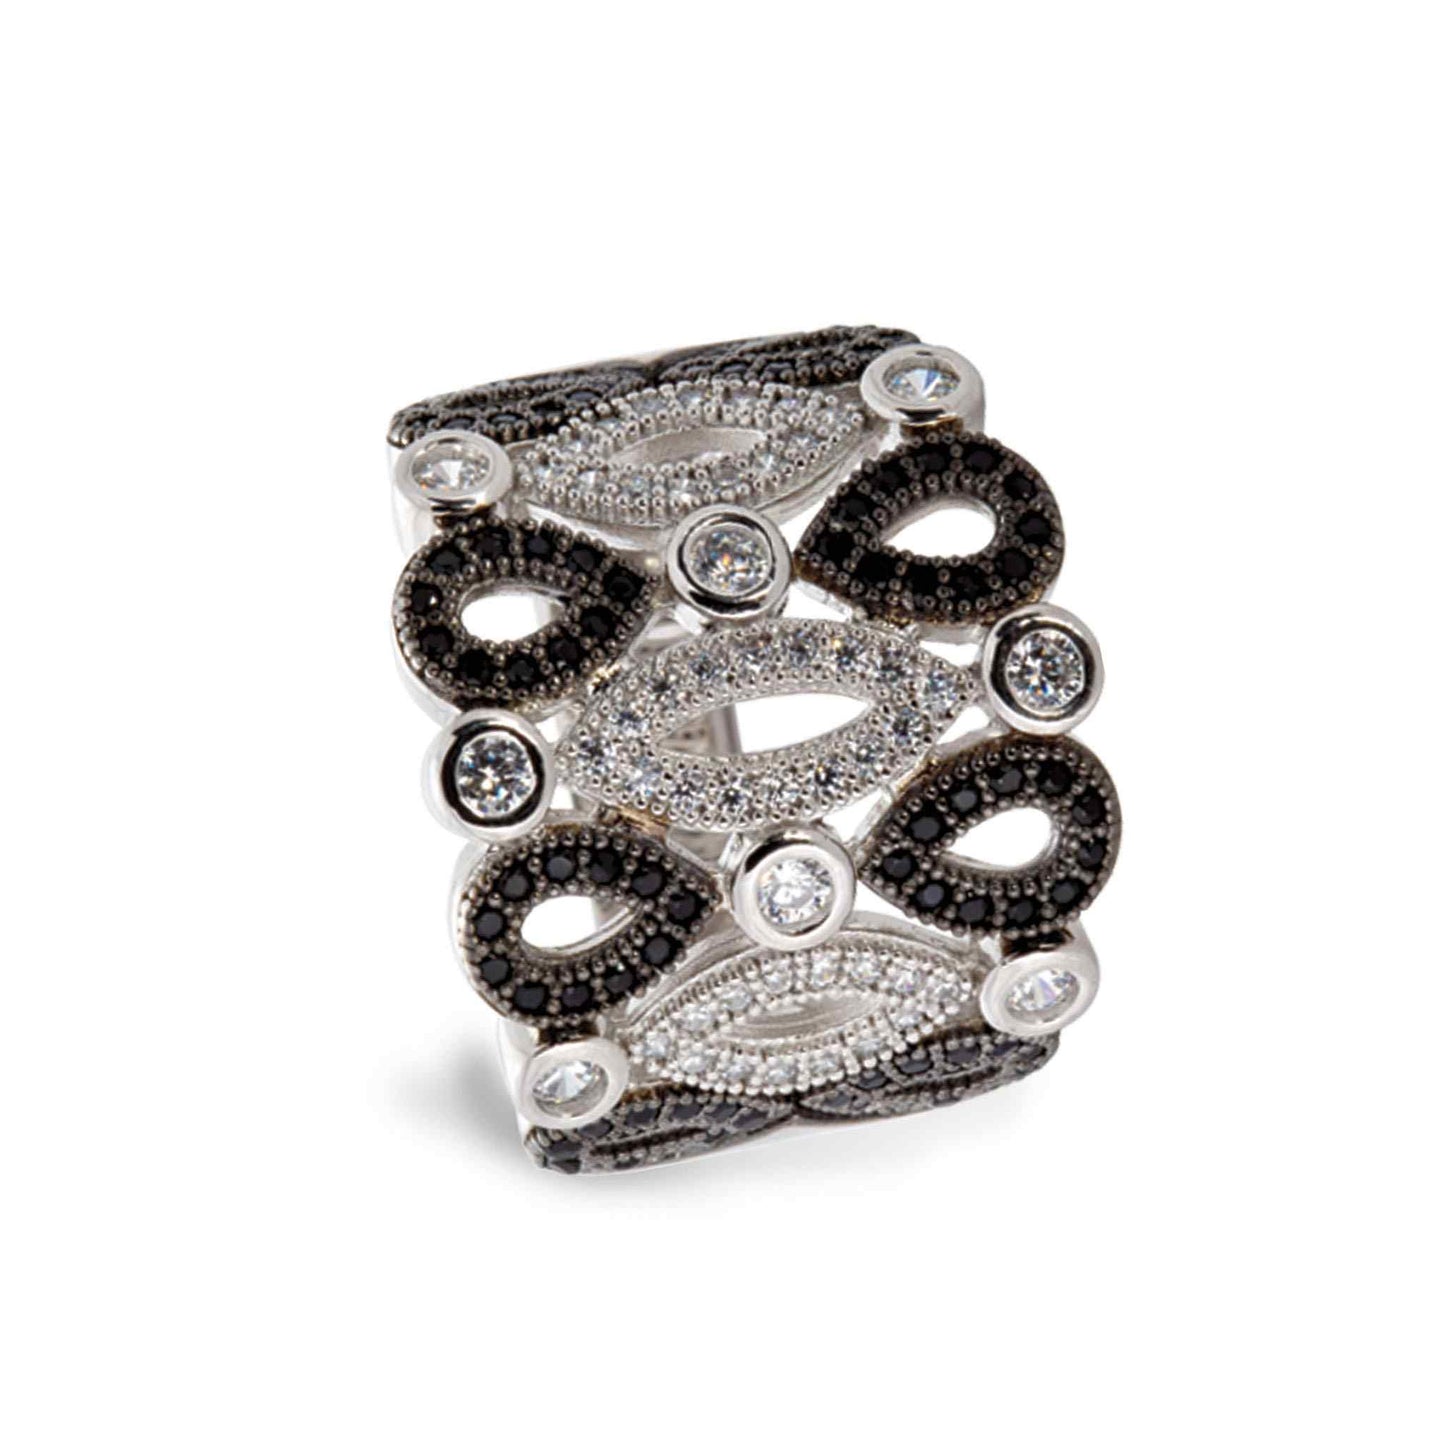 A platinum & black sterling silver art deco ring with 136 simulated diamonds displayed on a neutral white background.